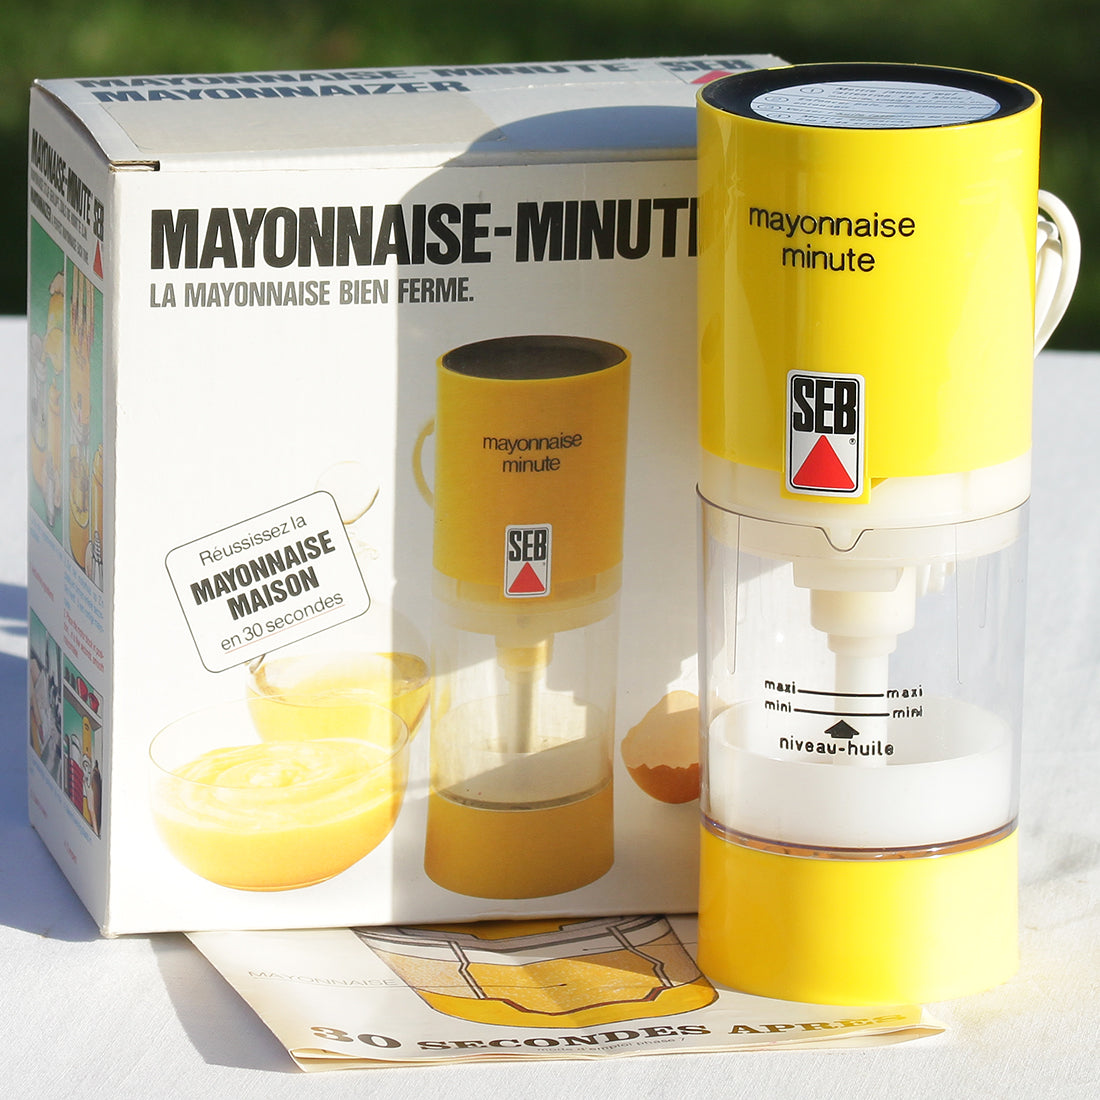 Small vintage Seb Mayonnaise-Minute Robot in box with instructions